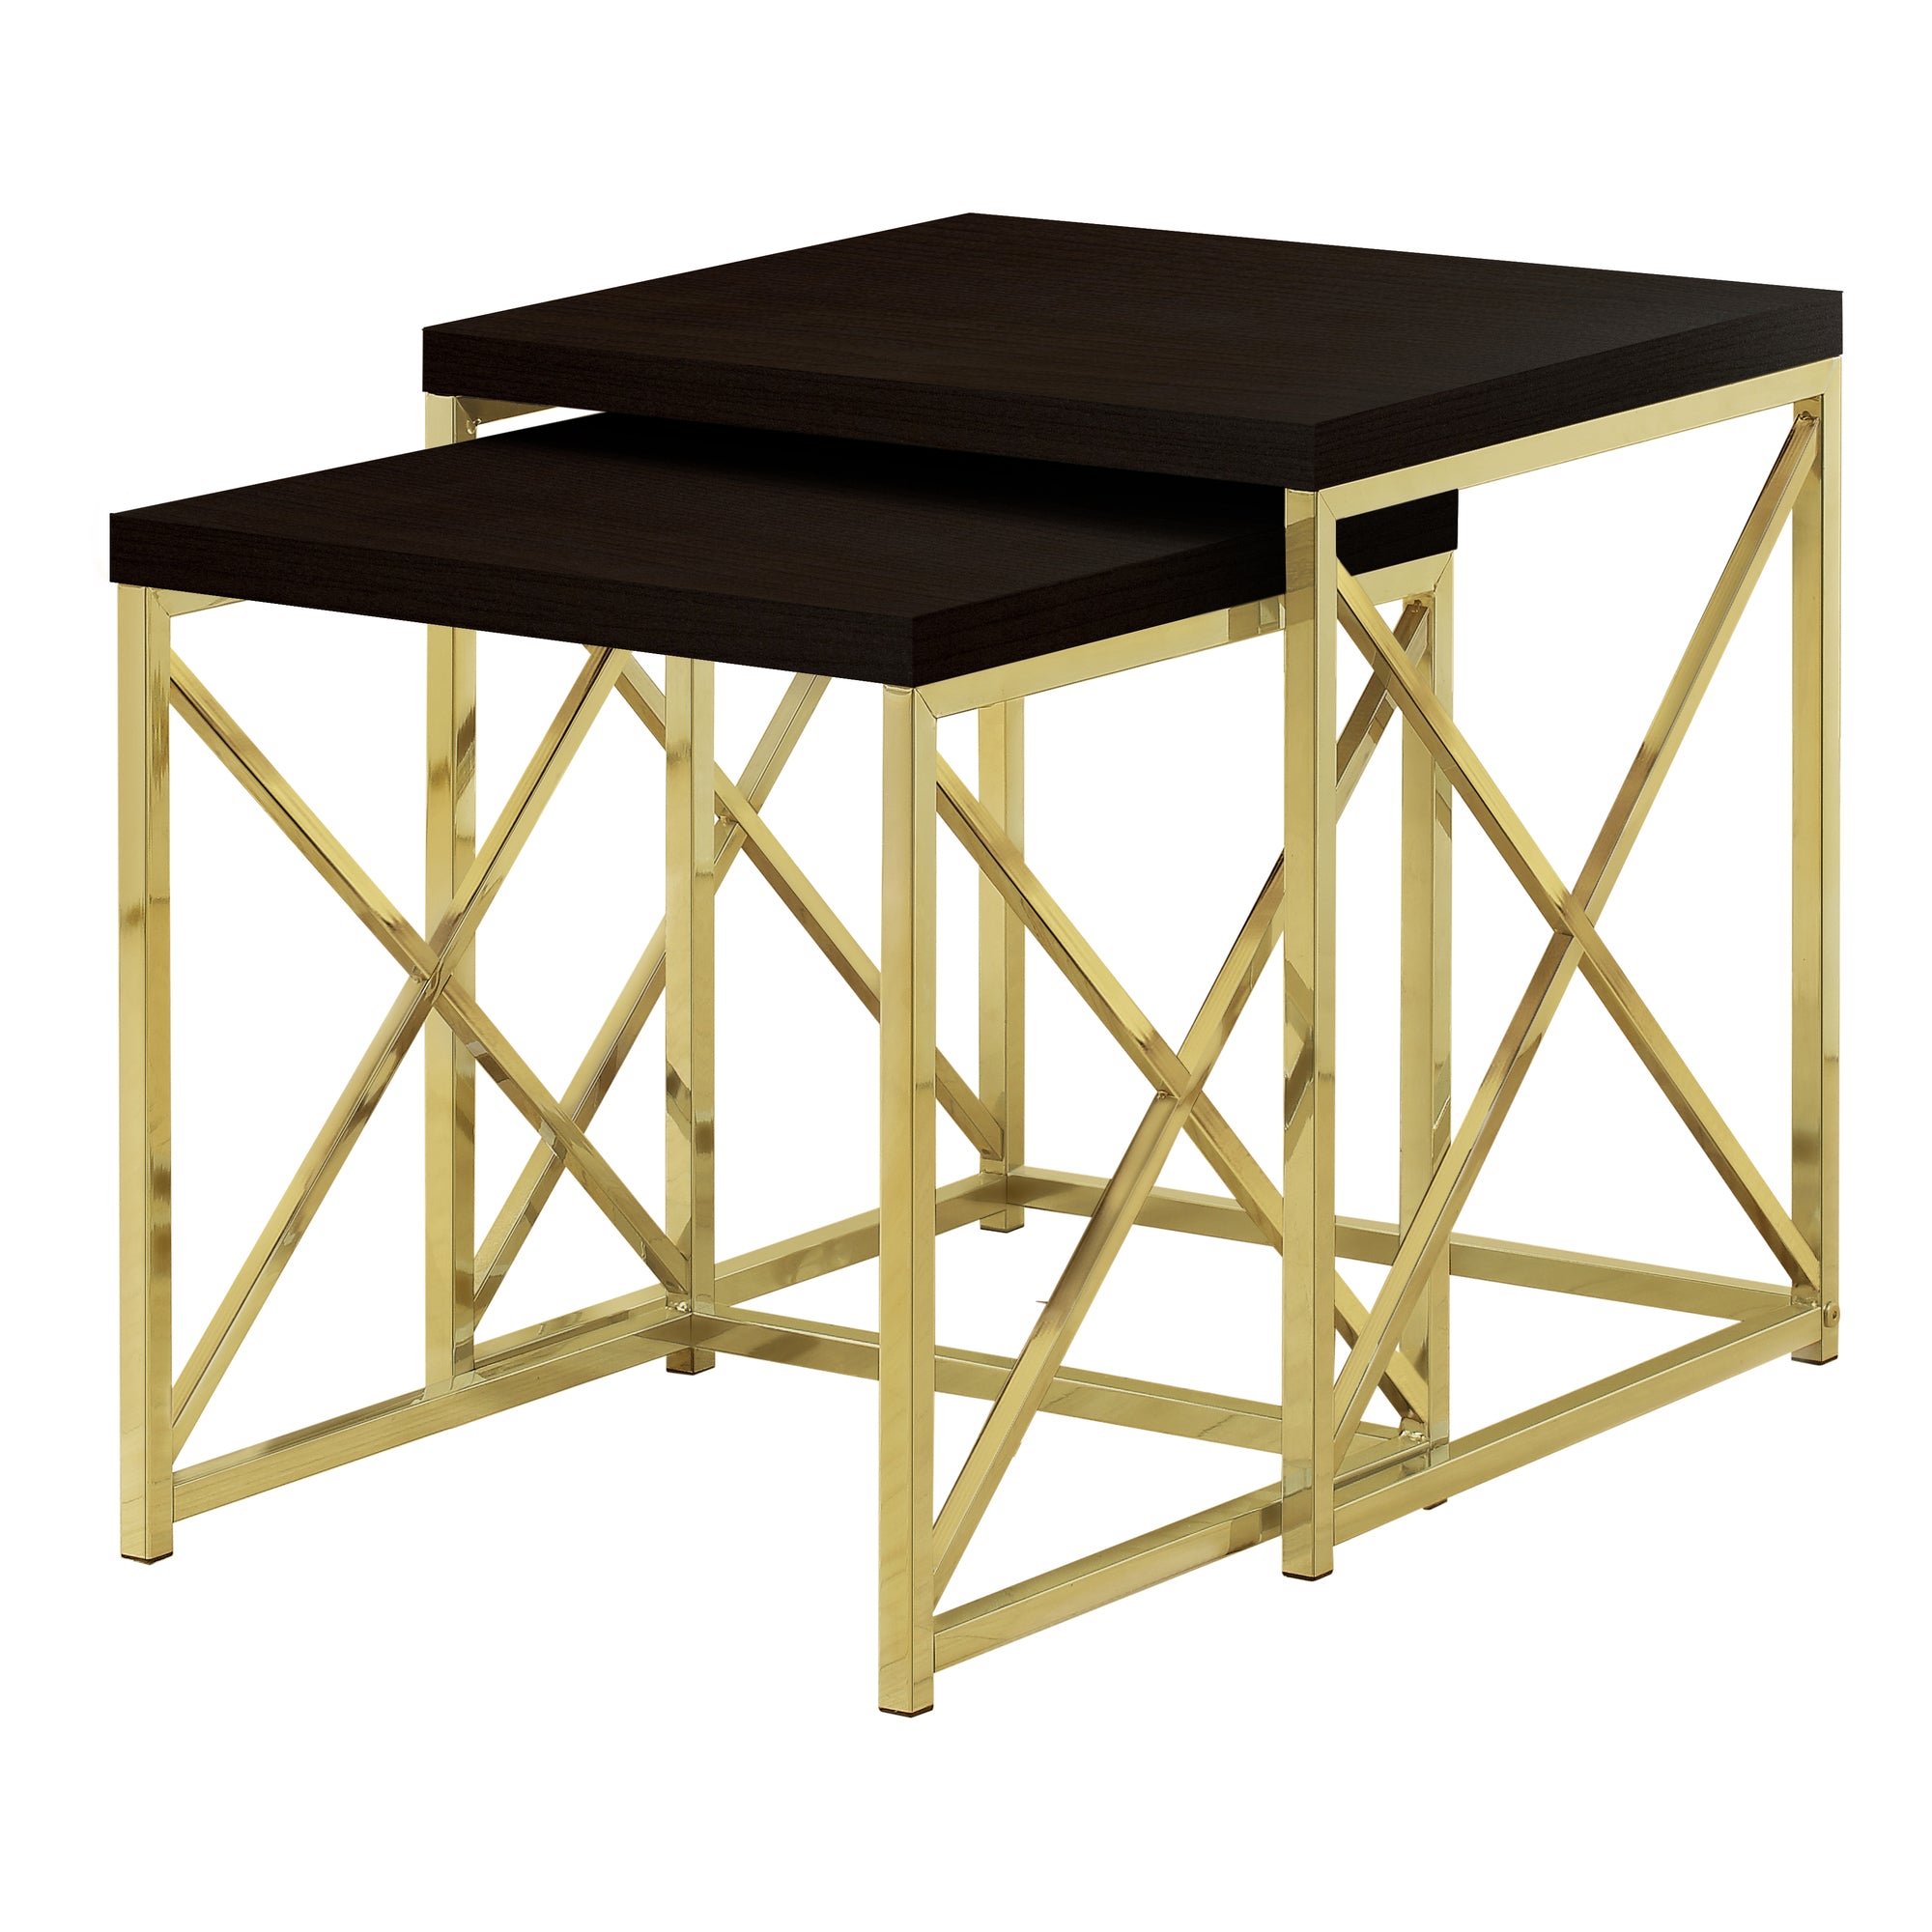 MN-823237    Nesting Table, Set Of 2, Side, End, Metal, Accent, Living Room, Bedroom, Metal Base, Laminate, Dark Brown, Gold, Contemporary, Modern